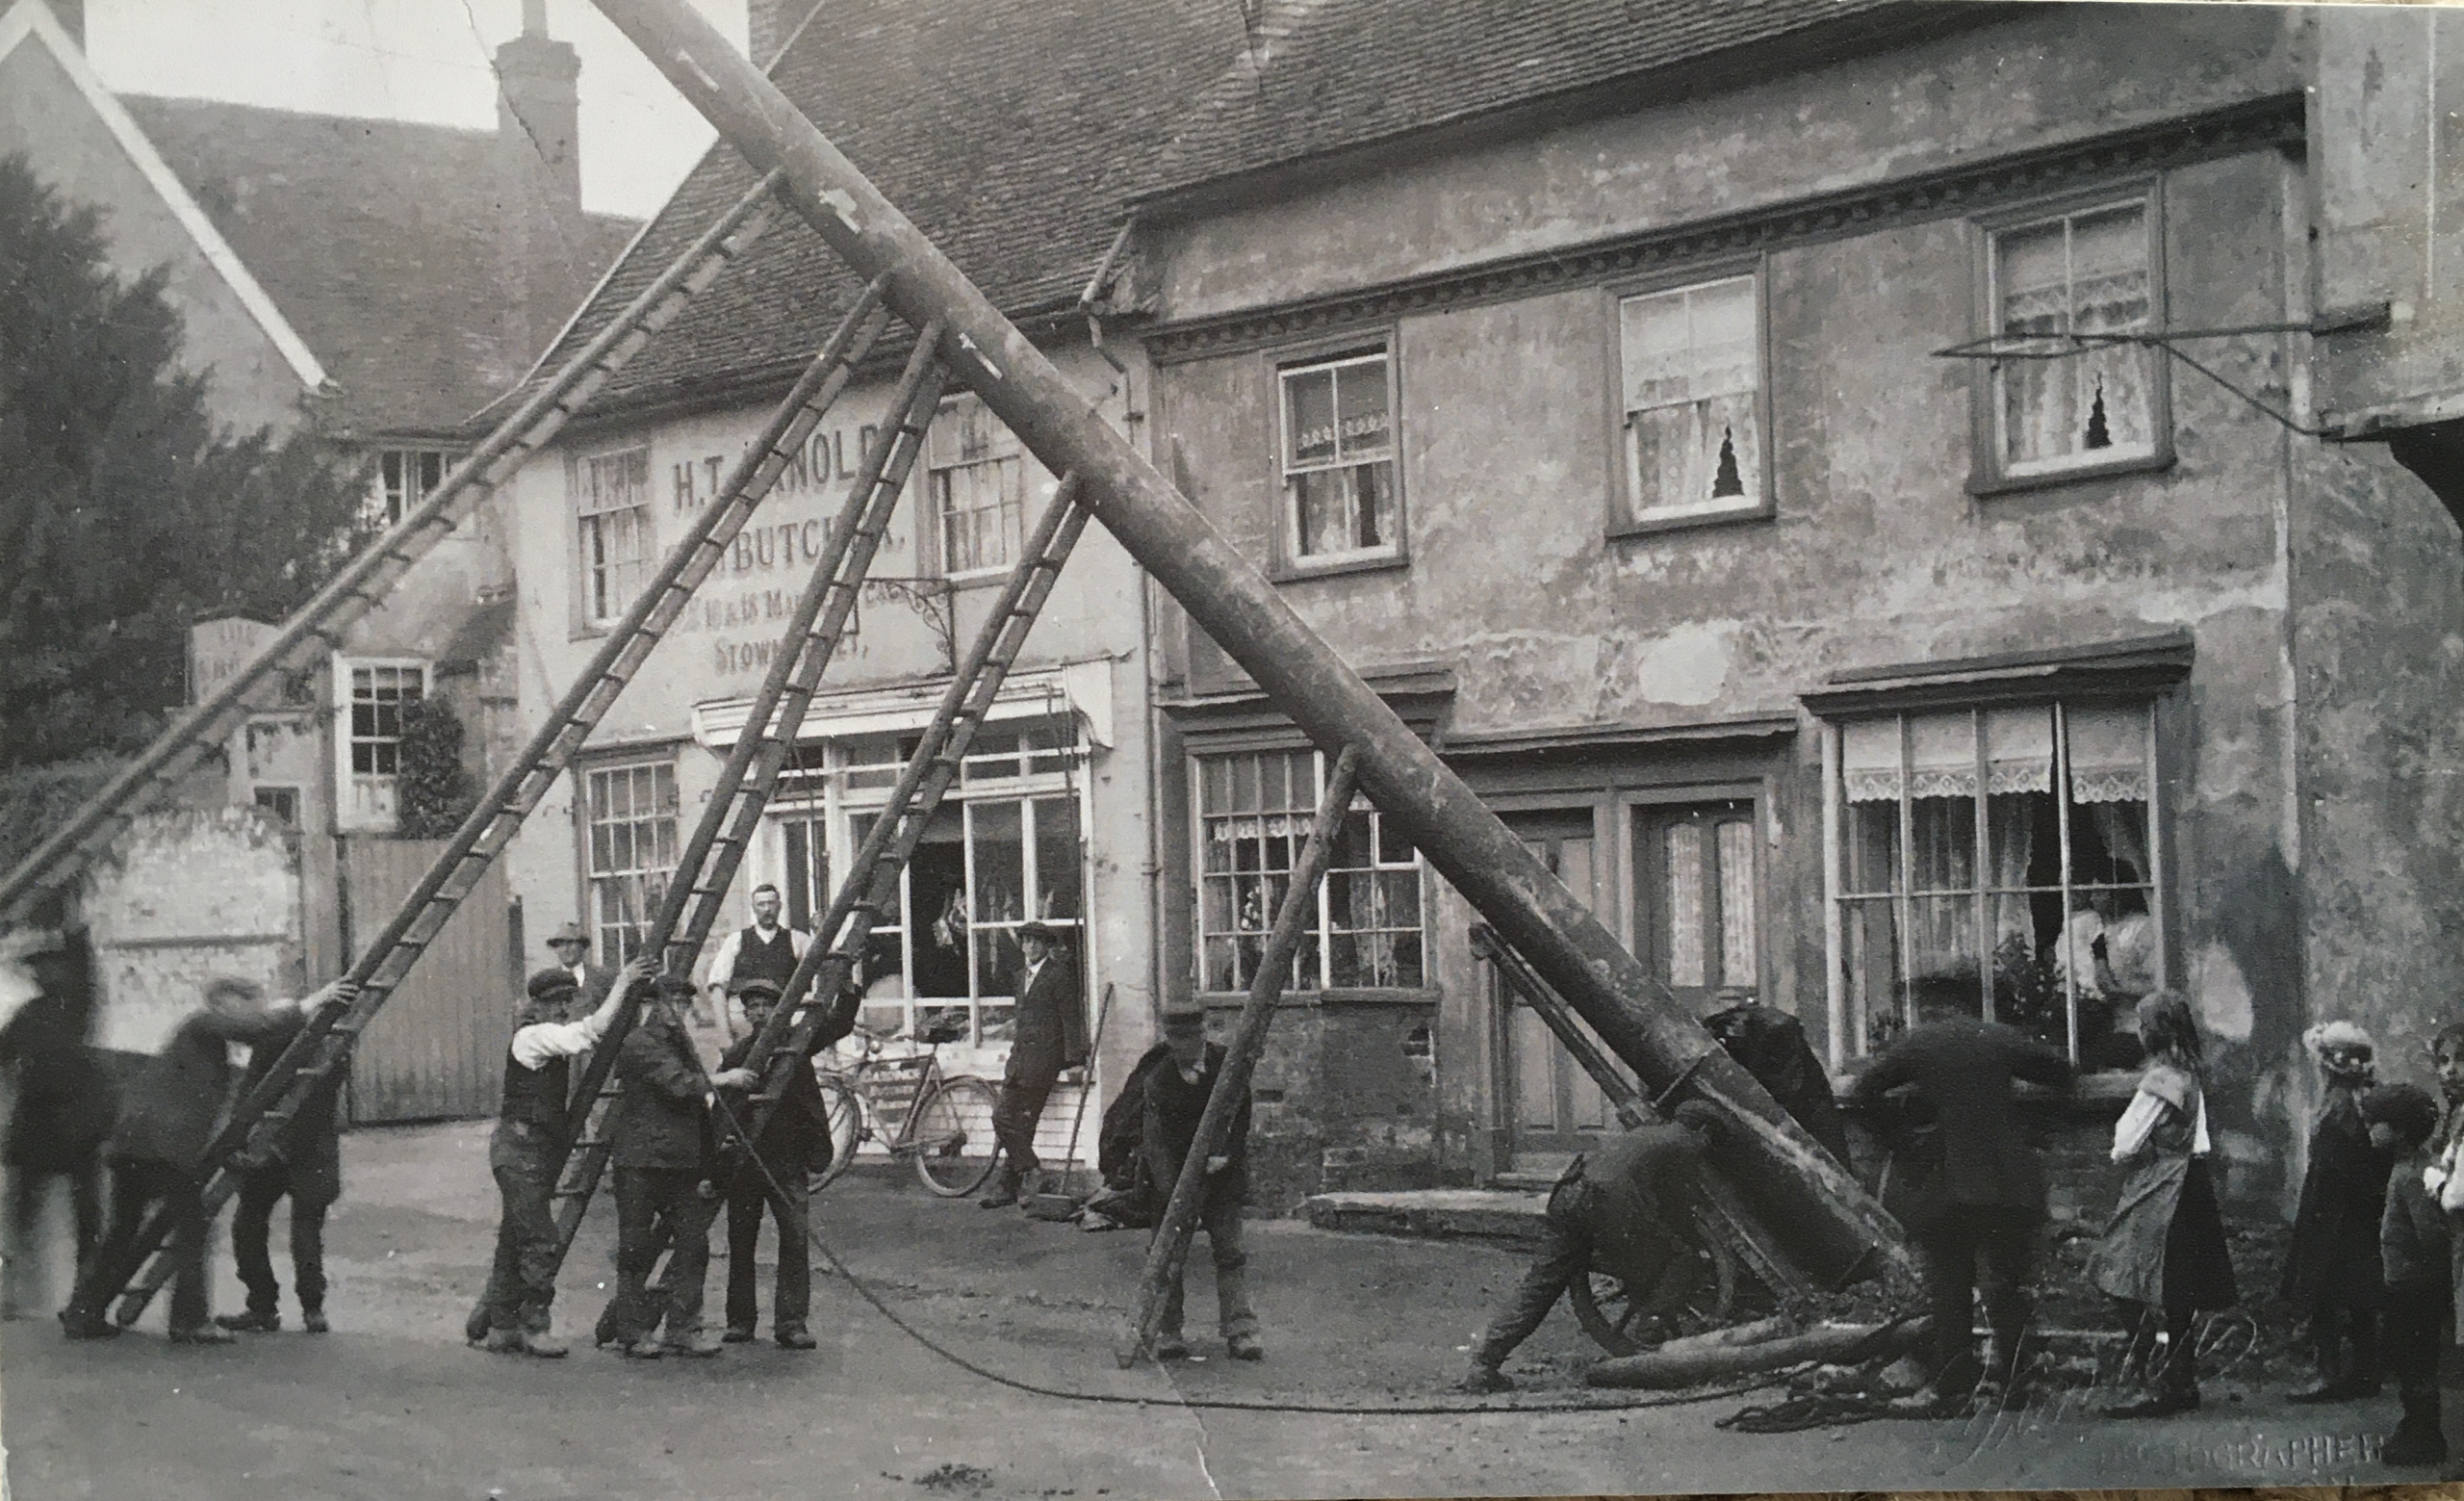 Telegraph pole being erected outside number 96 High Street